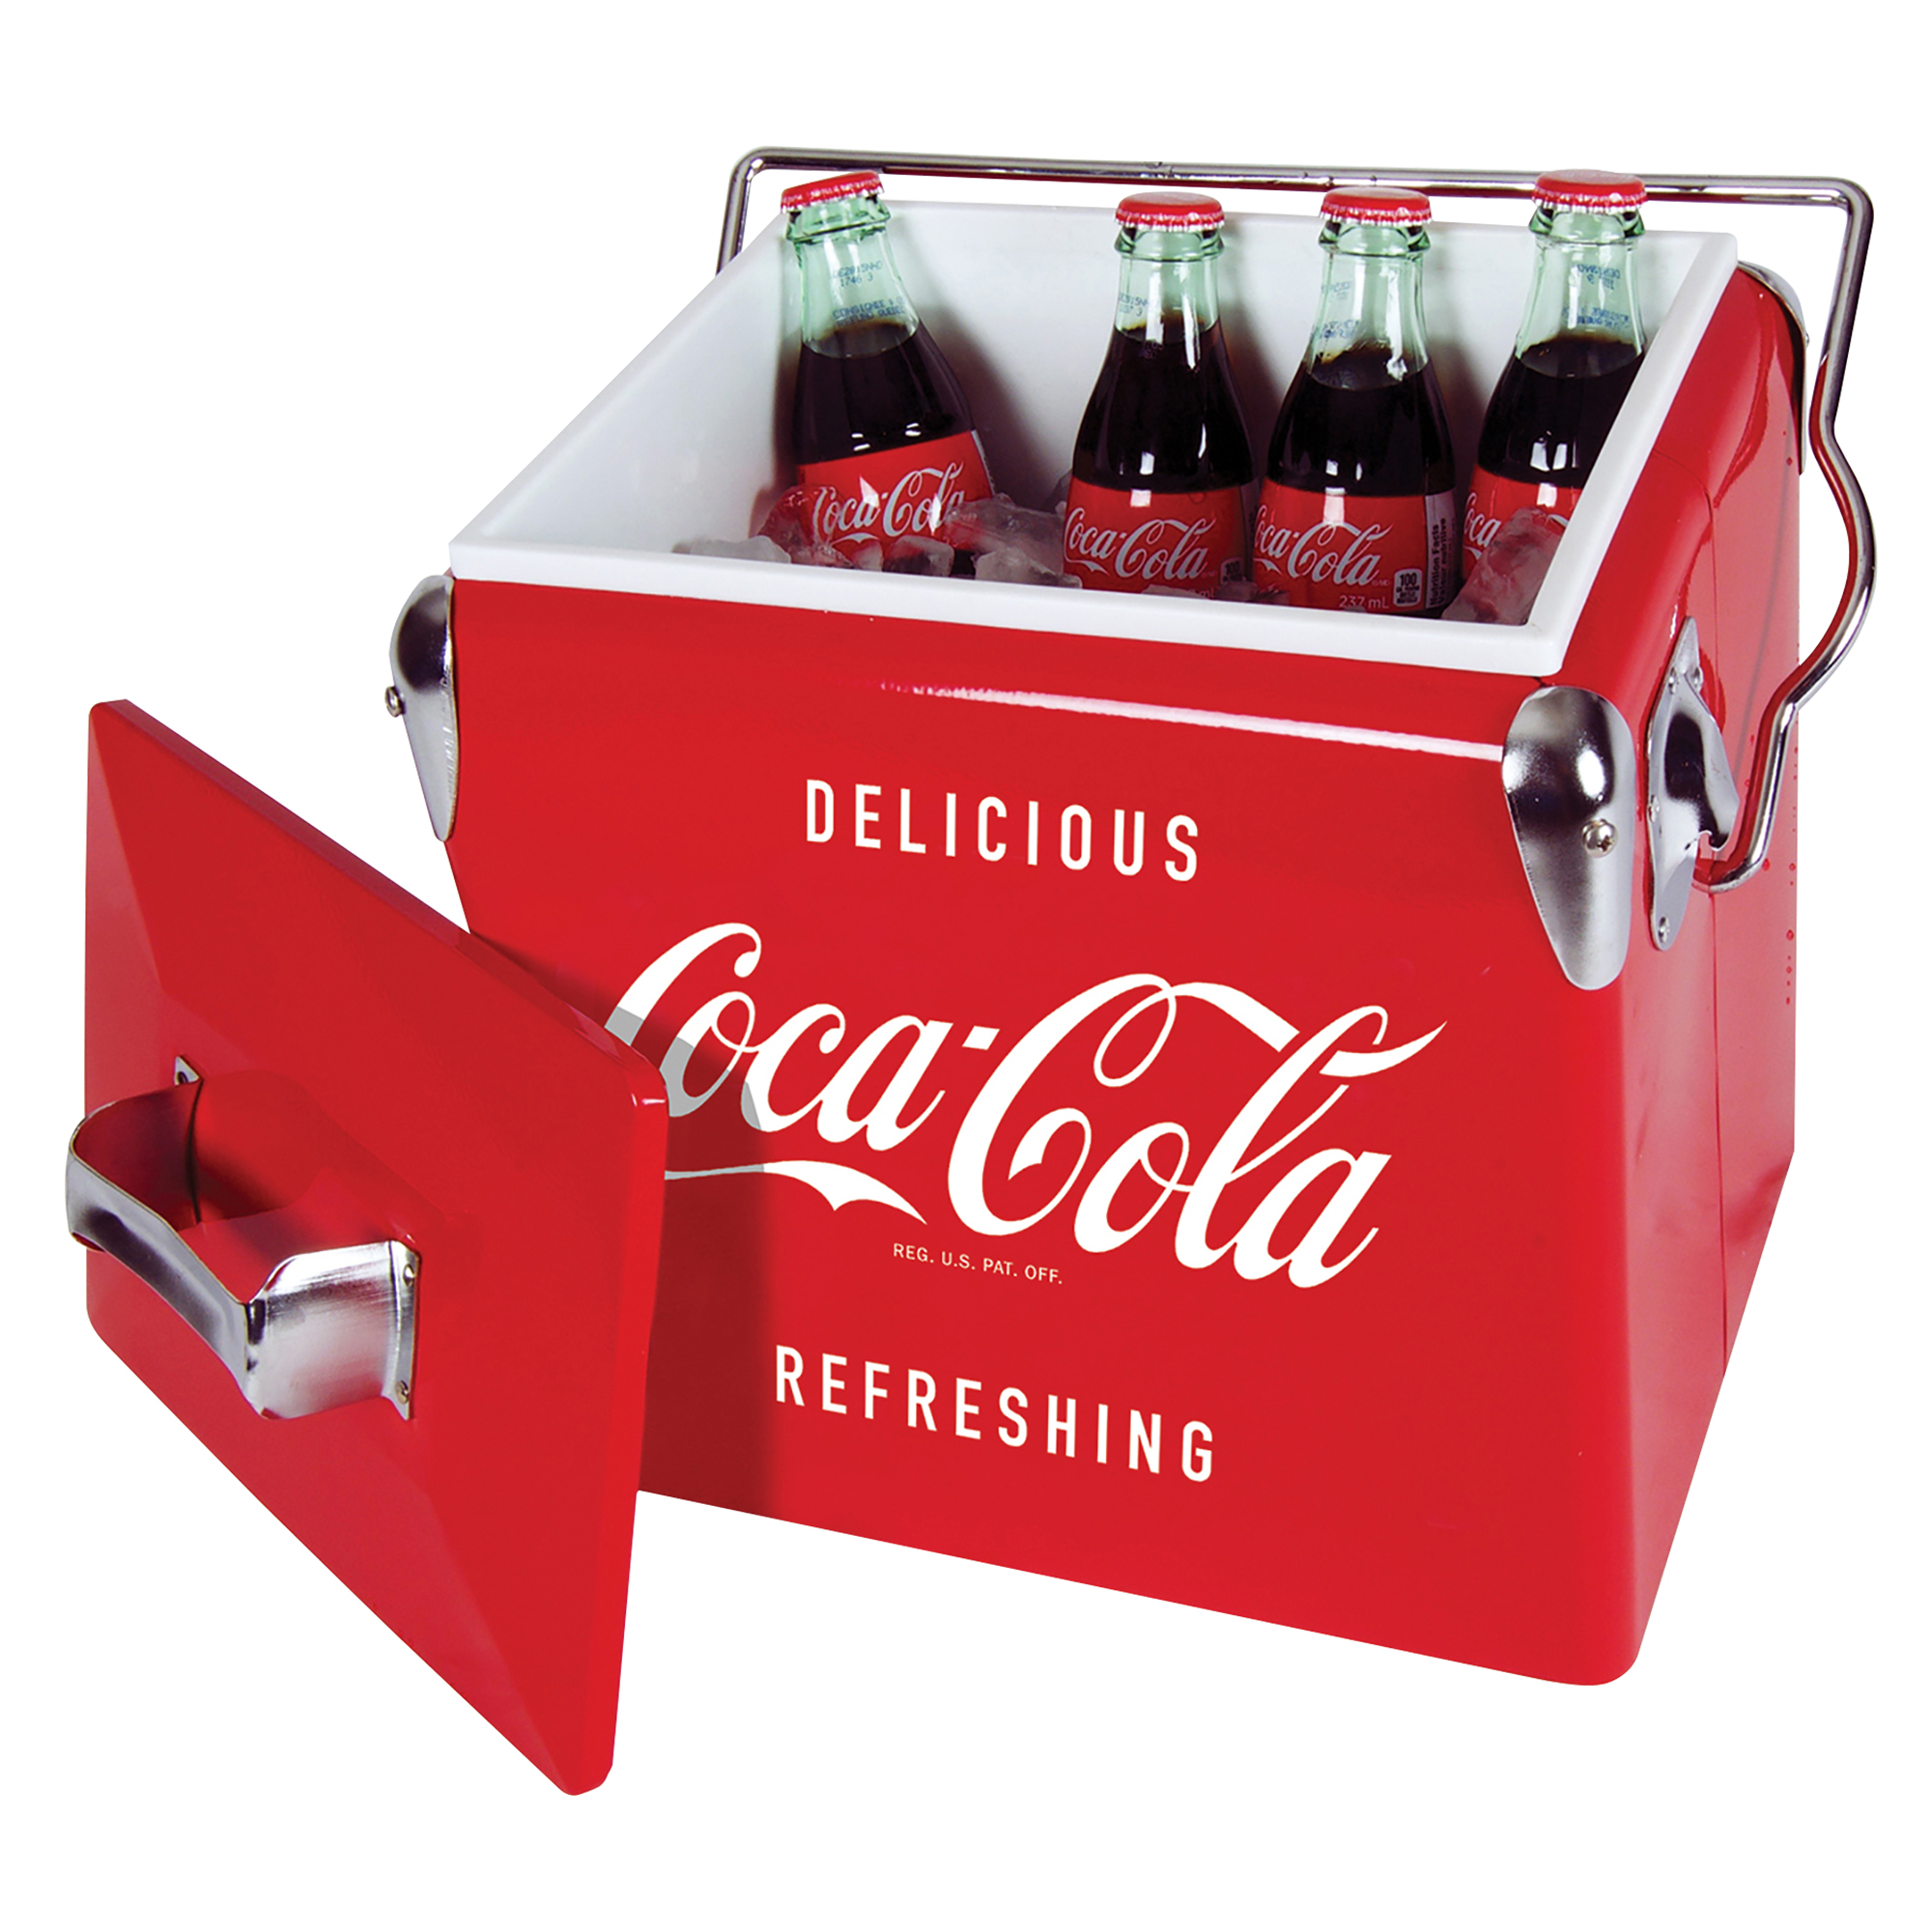 Coca-Cola Retro Portable Ice Chest Cooler with Bottle Opener 13L (14 qt), 18 Can Capacity, Red Vintage Style Ice Bucket for Camping, Beach, Picnic, RV, BBQs, Tailgating, Fishing - image 2 of 7